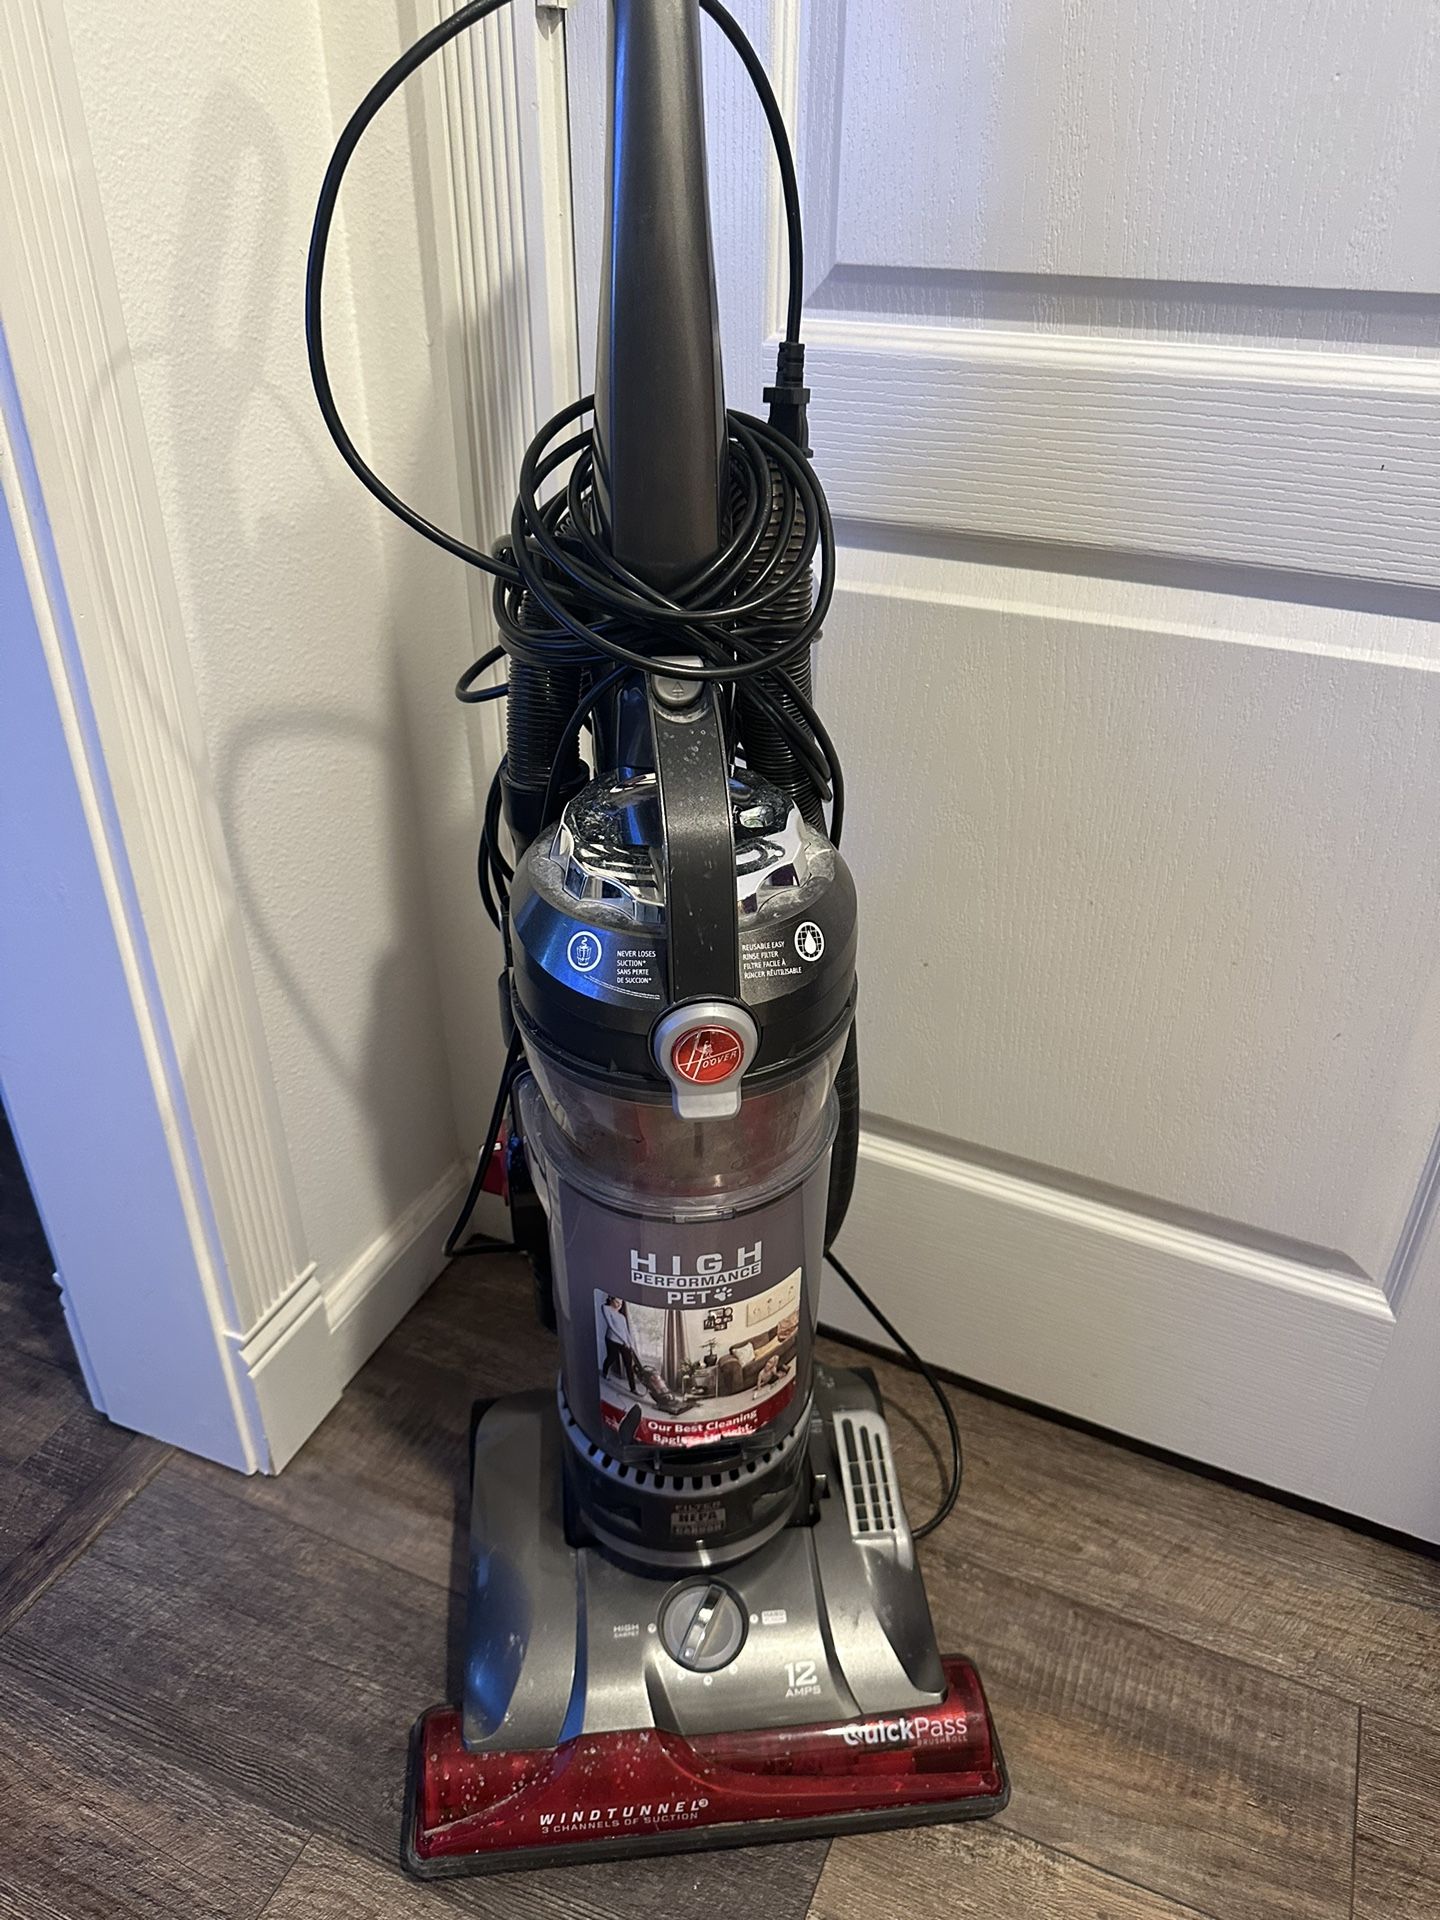 Hoover High Performance Wind tunnel Pet Bagless Vacuum